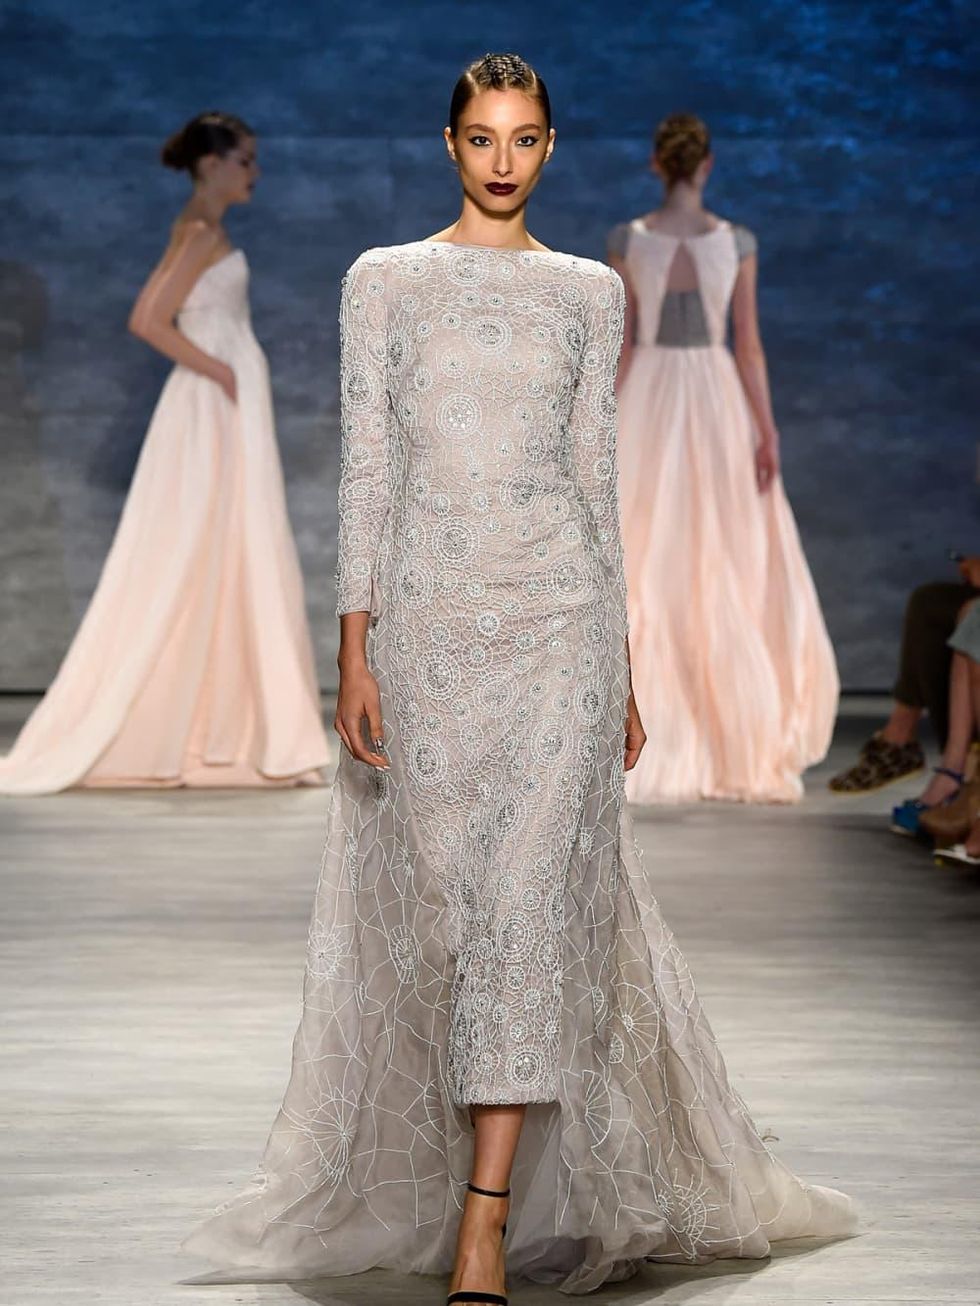 Fashion Week spring 2015 Bibhu Mohapatra lace gown